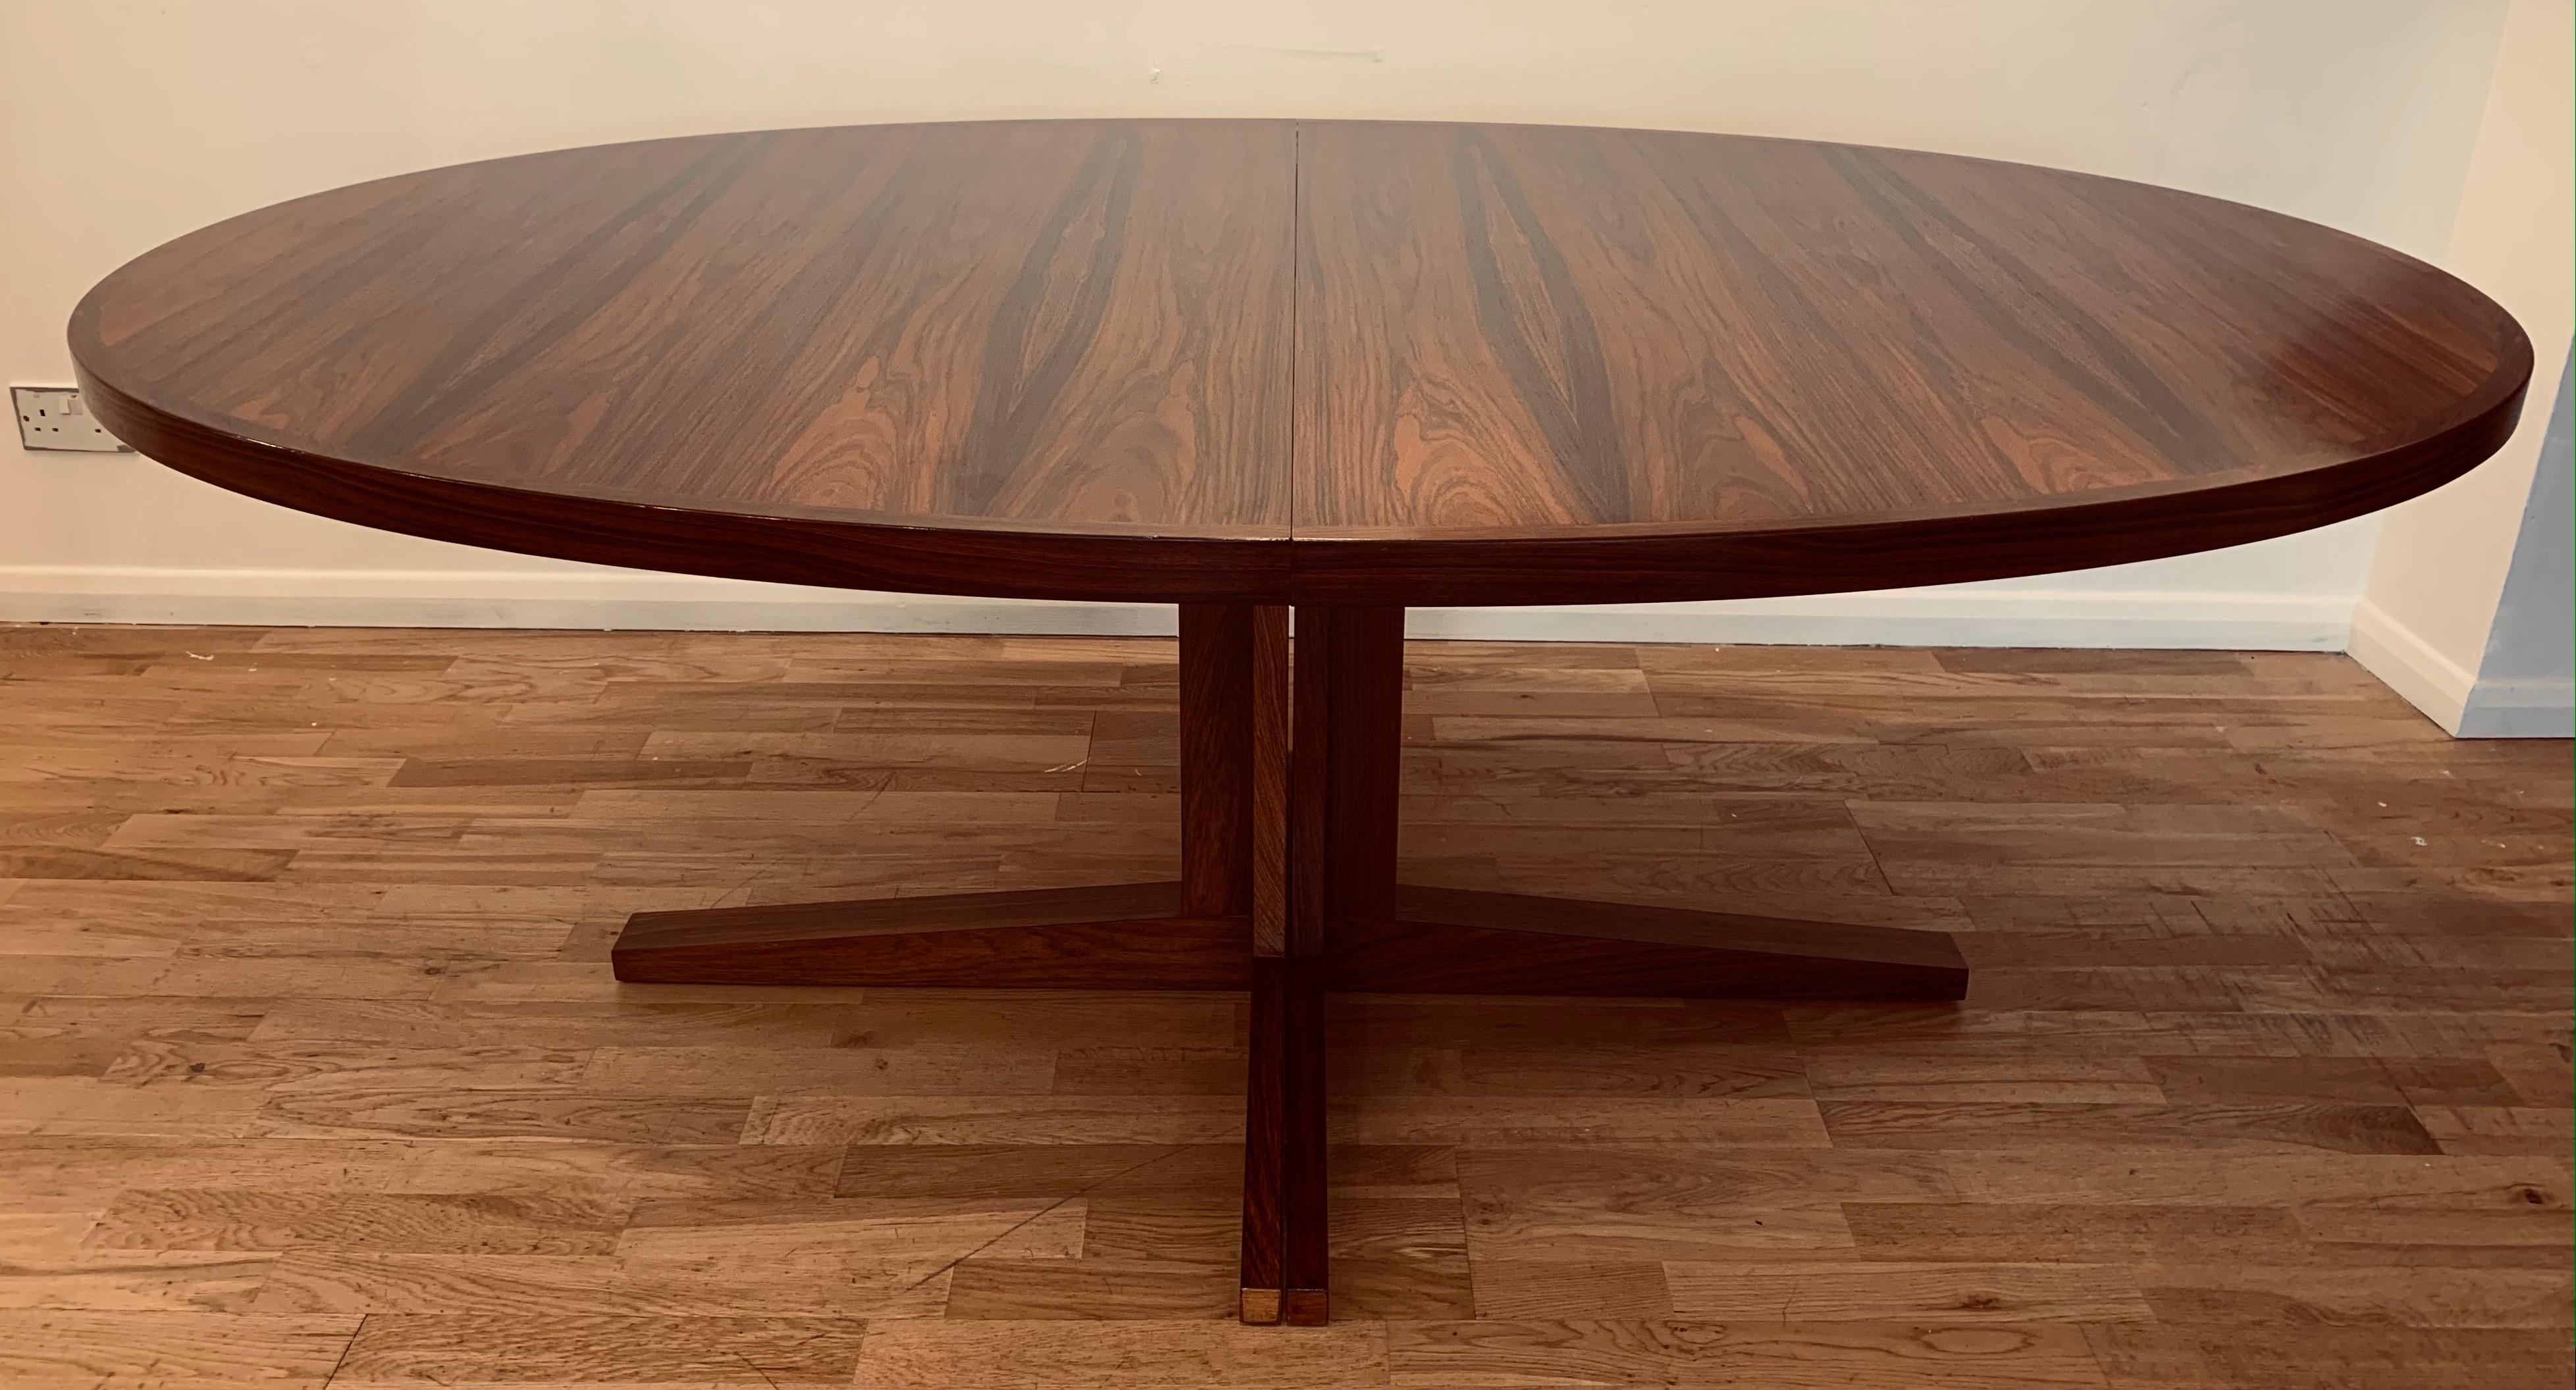 An absolutely stunning large, extendable, Danish, Rosewood, oval dining table, which has two separate leaves, and a feature pedestal base which opens when extended. Designed by John Mortensen for Heltborg Møbelfabrik during the 1960s. Designed in